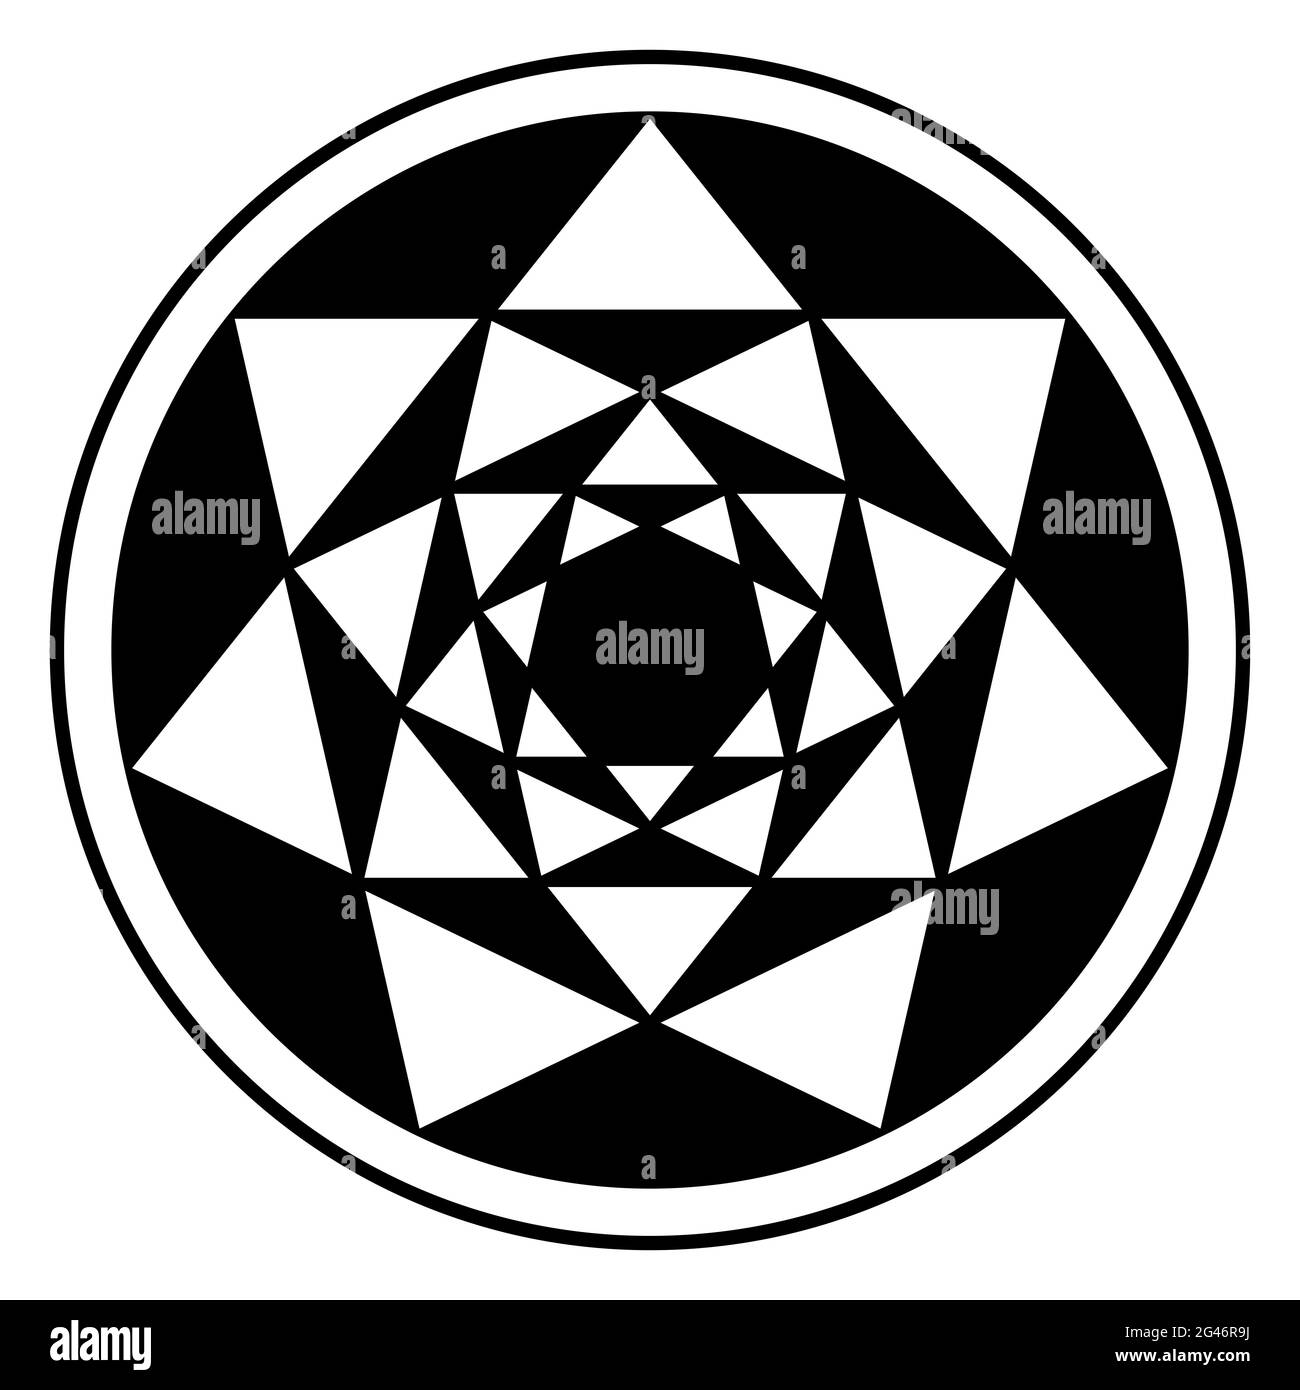 Inverted four heptagrams, and their resulting triangle patterns, in circle frame. Crossing points of seven-pointed stars placed one inside the other. Stock Photo